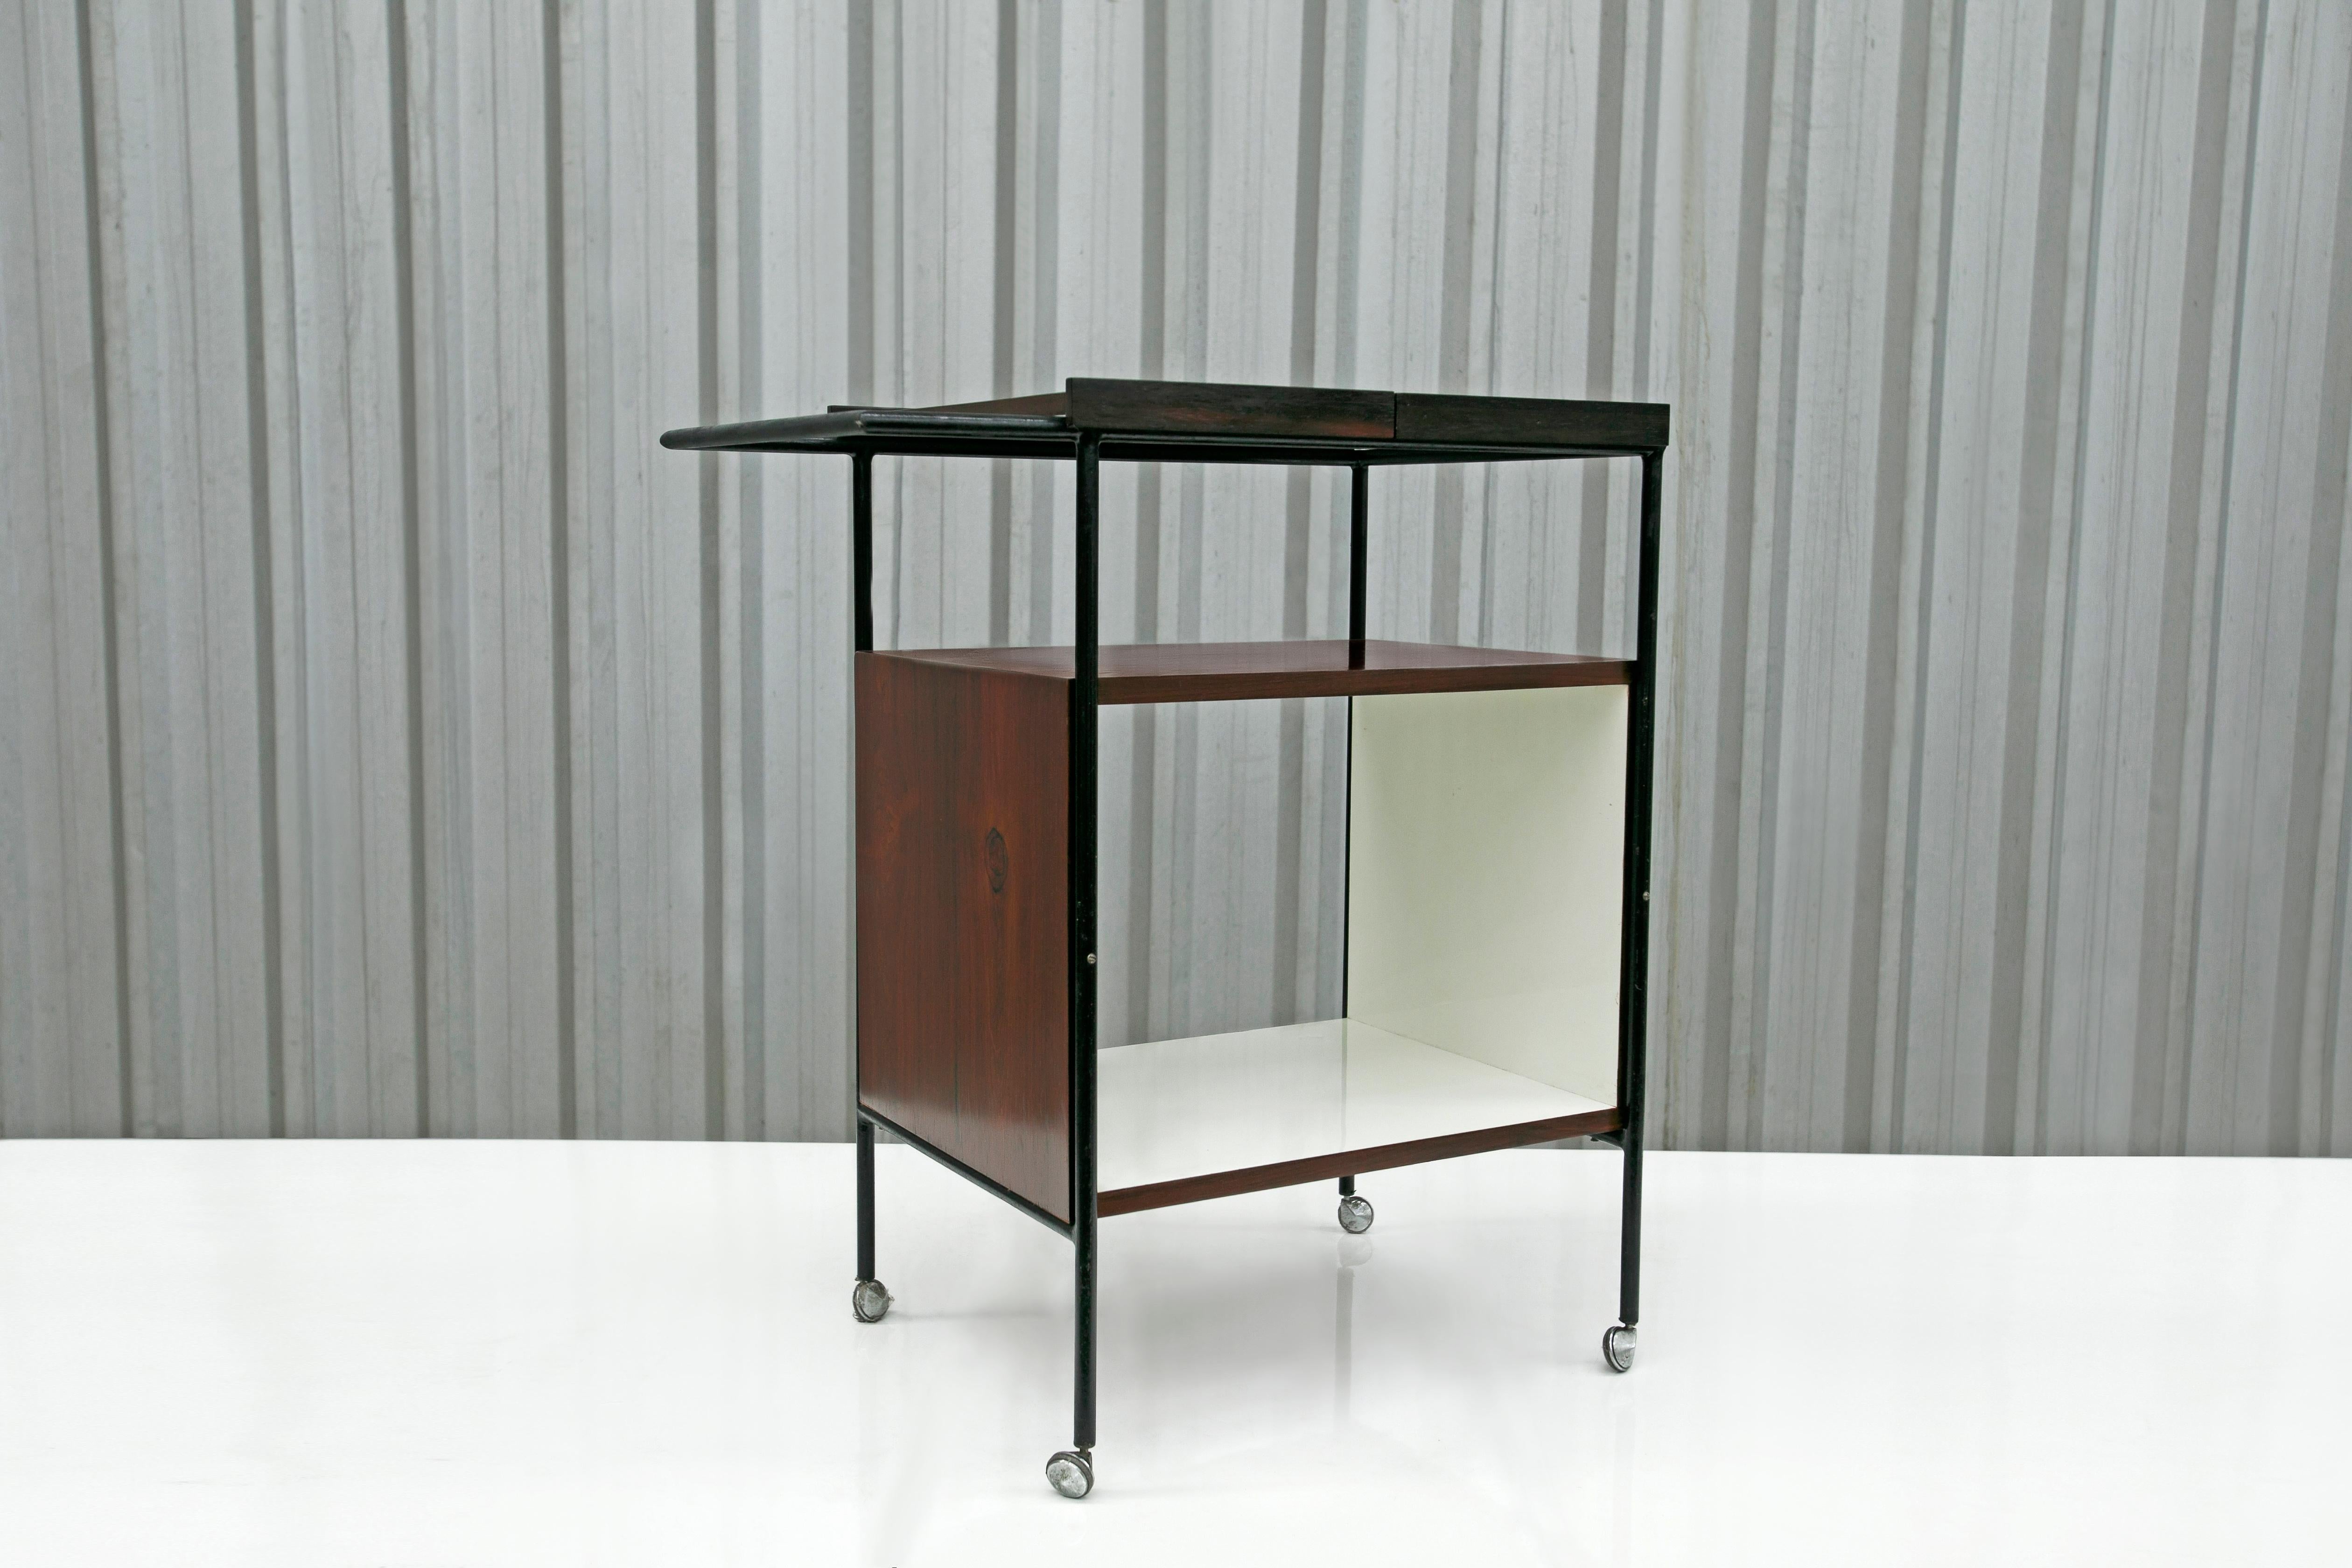 This mid-century modern bar cart is made with Brazilian hardwood and has a black iron frame with white formica on the interior shelf. It features a large shelf, silver wheels on each leg, and two removable trays that can be moved on a sliding